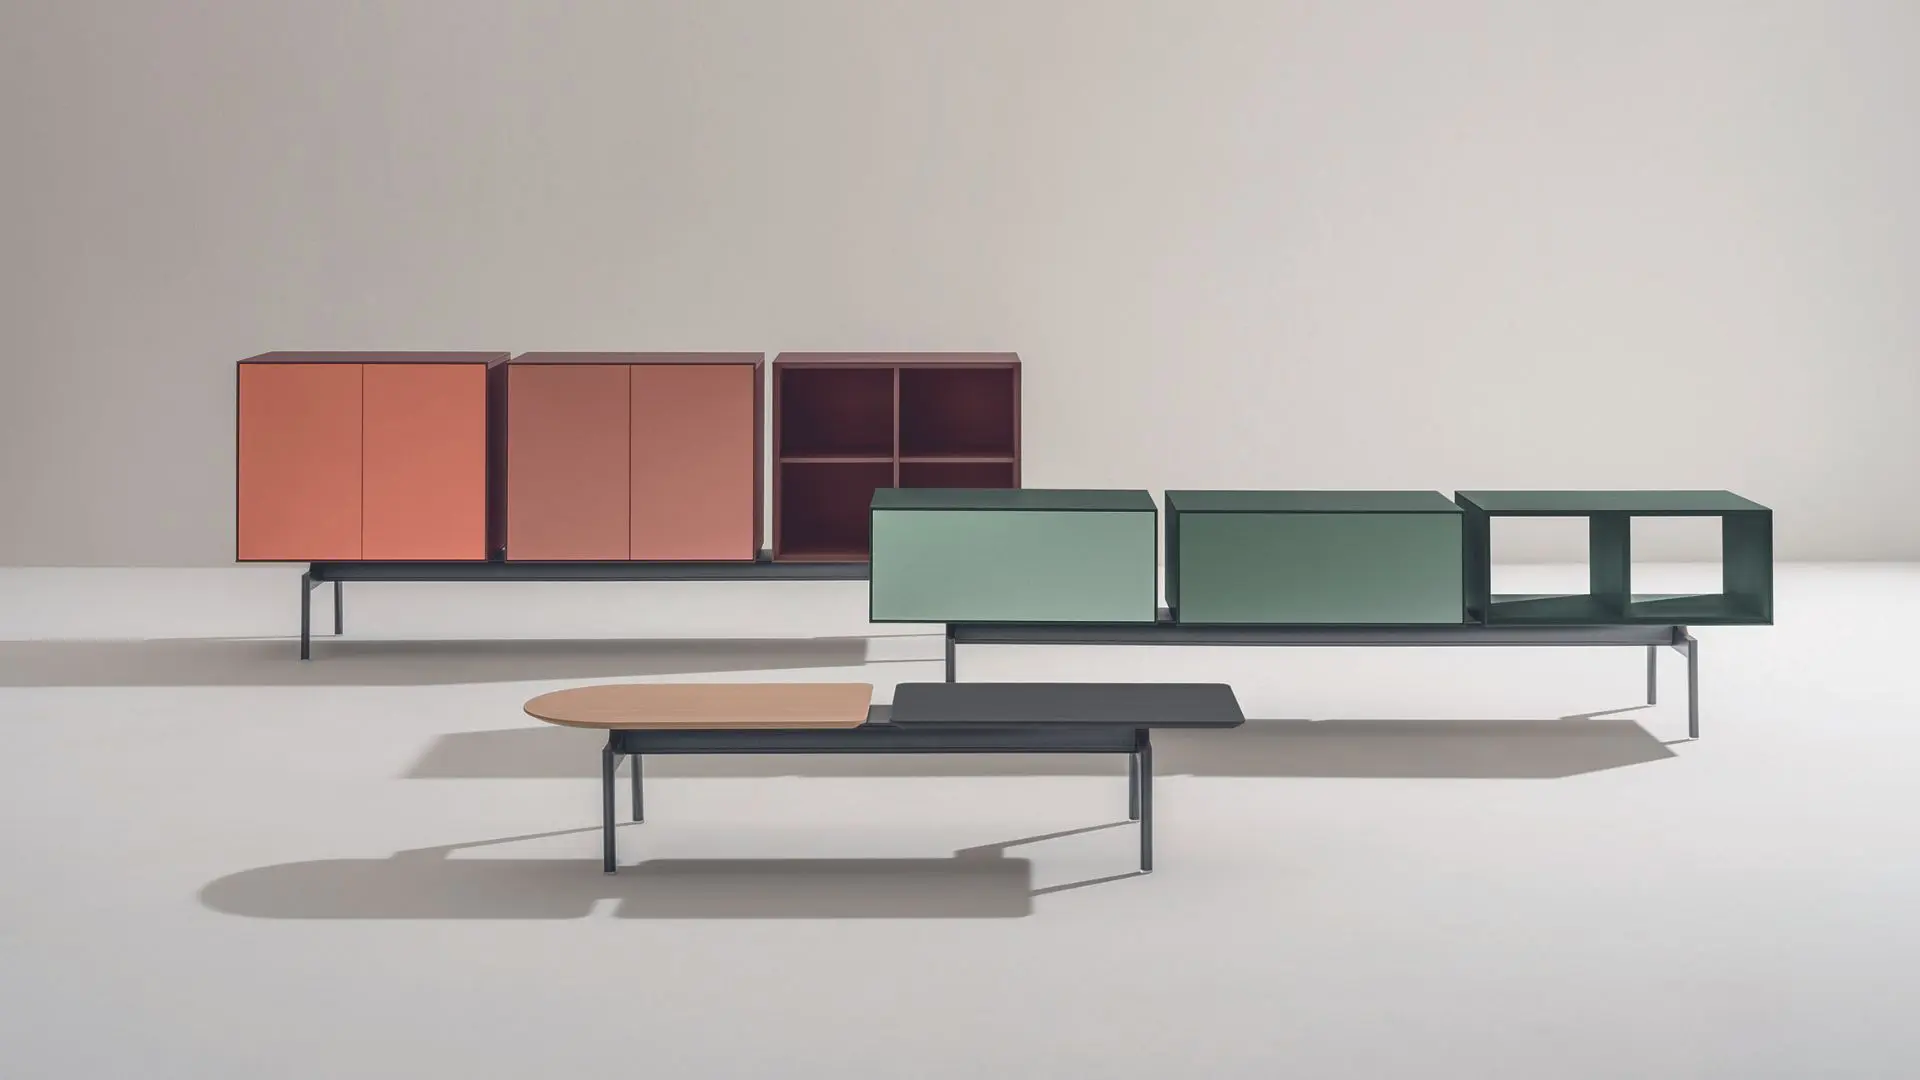 Semiton furniture collection by Arper _ a system built with flexibility in mind - cover